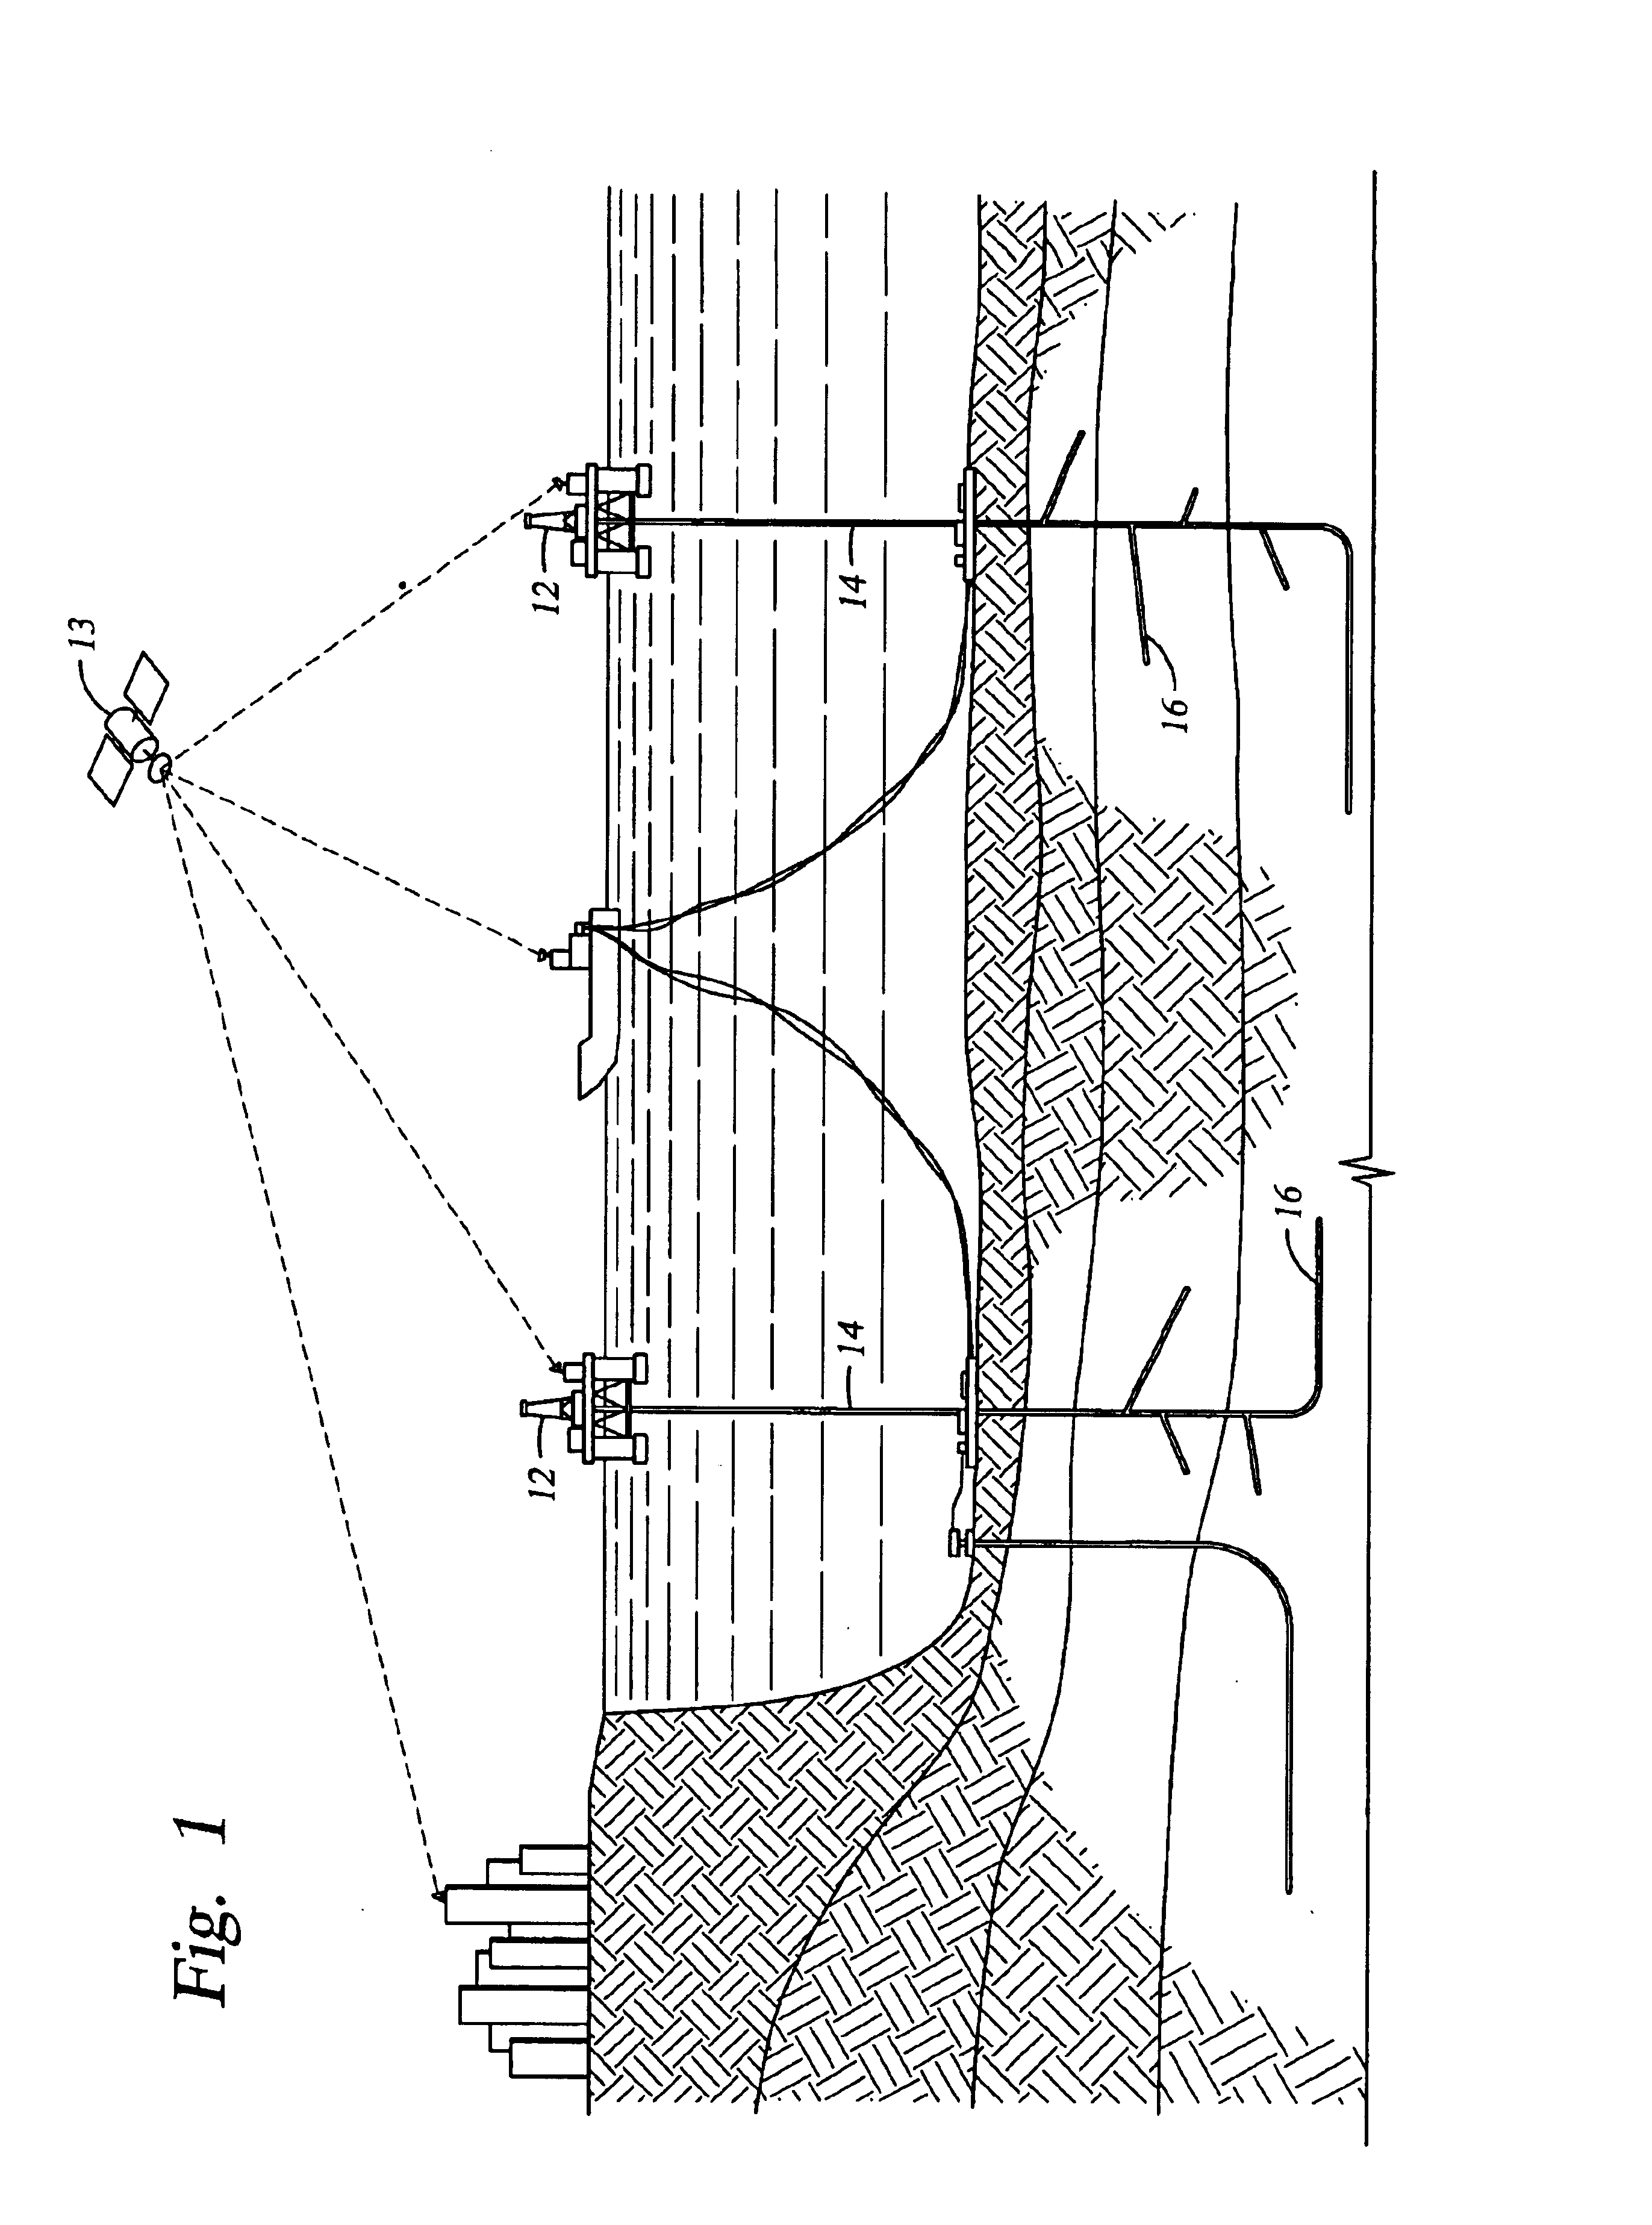 Methods and apparatus for monitoring and controlling oil and gas production wells from a remote location